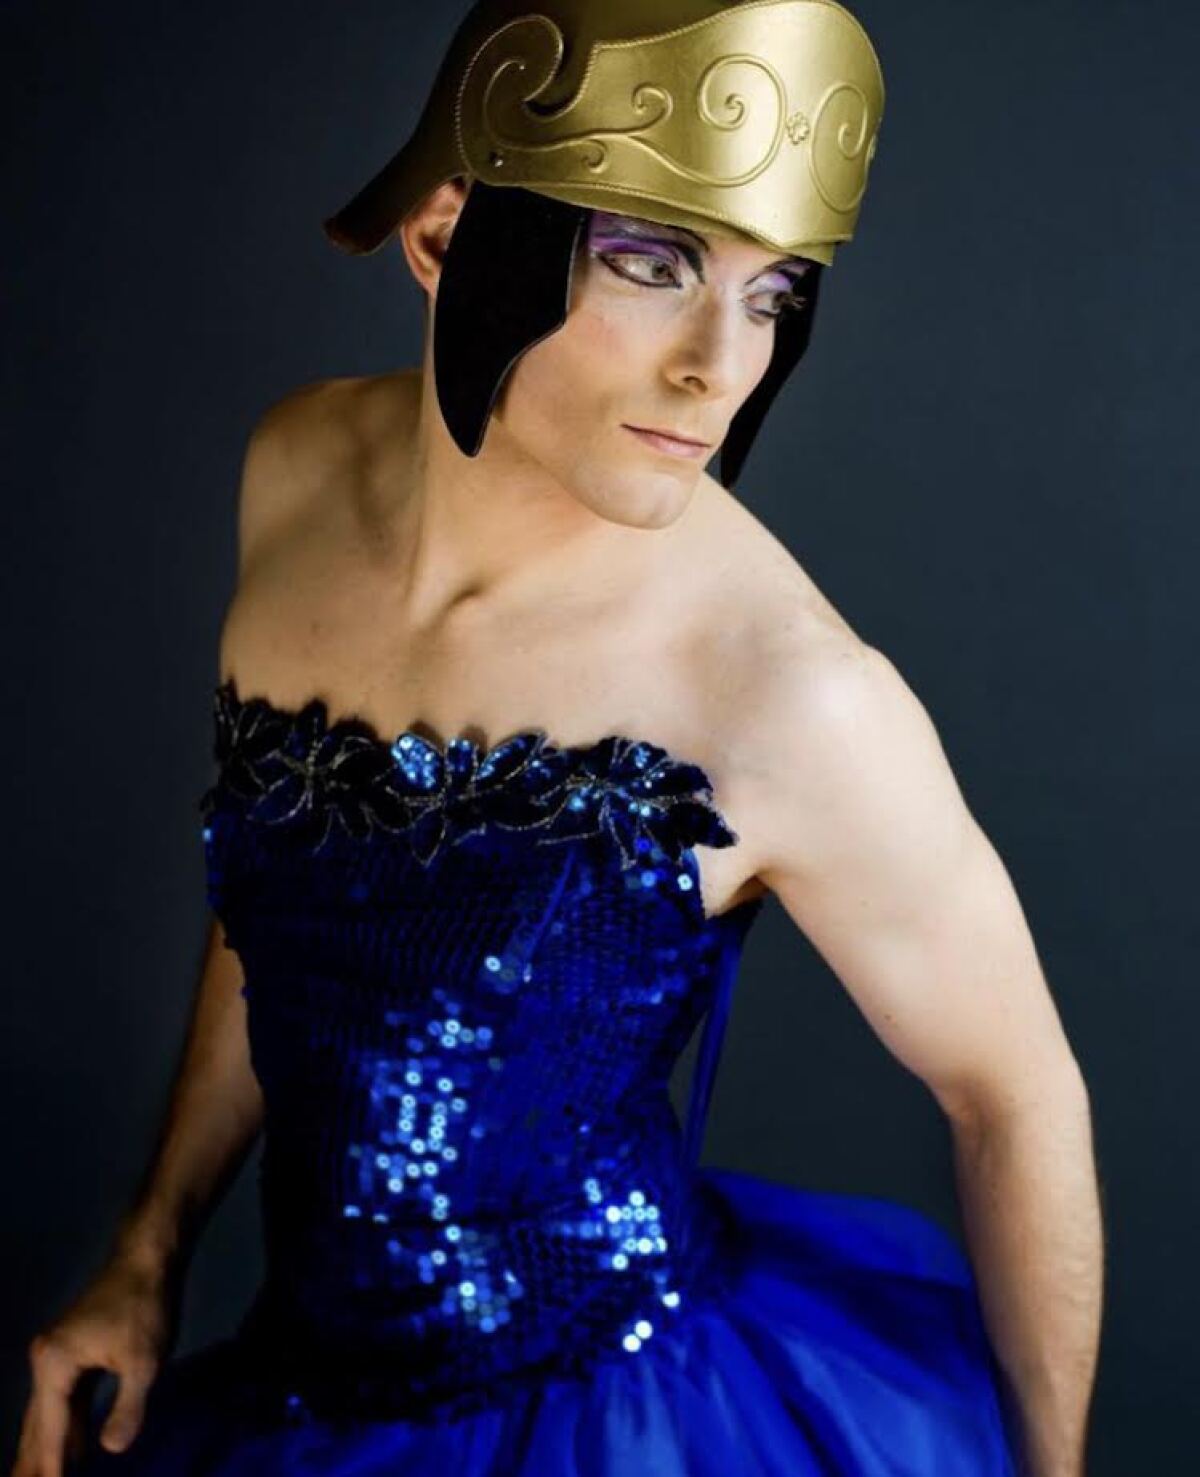 A person in a crown and blue outfit.